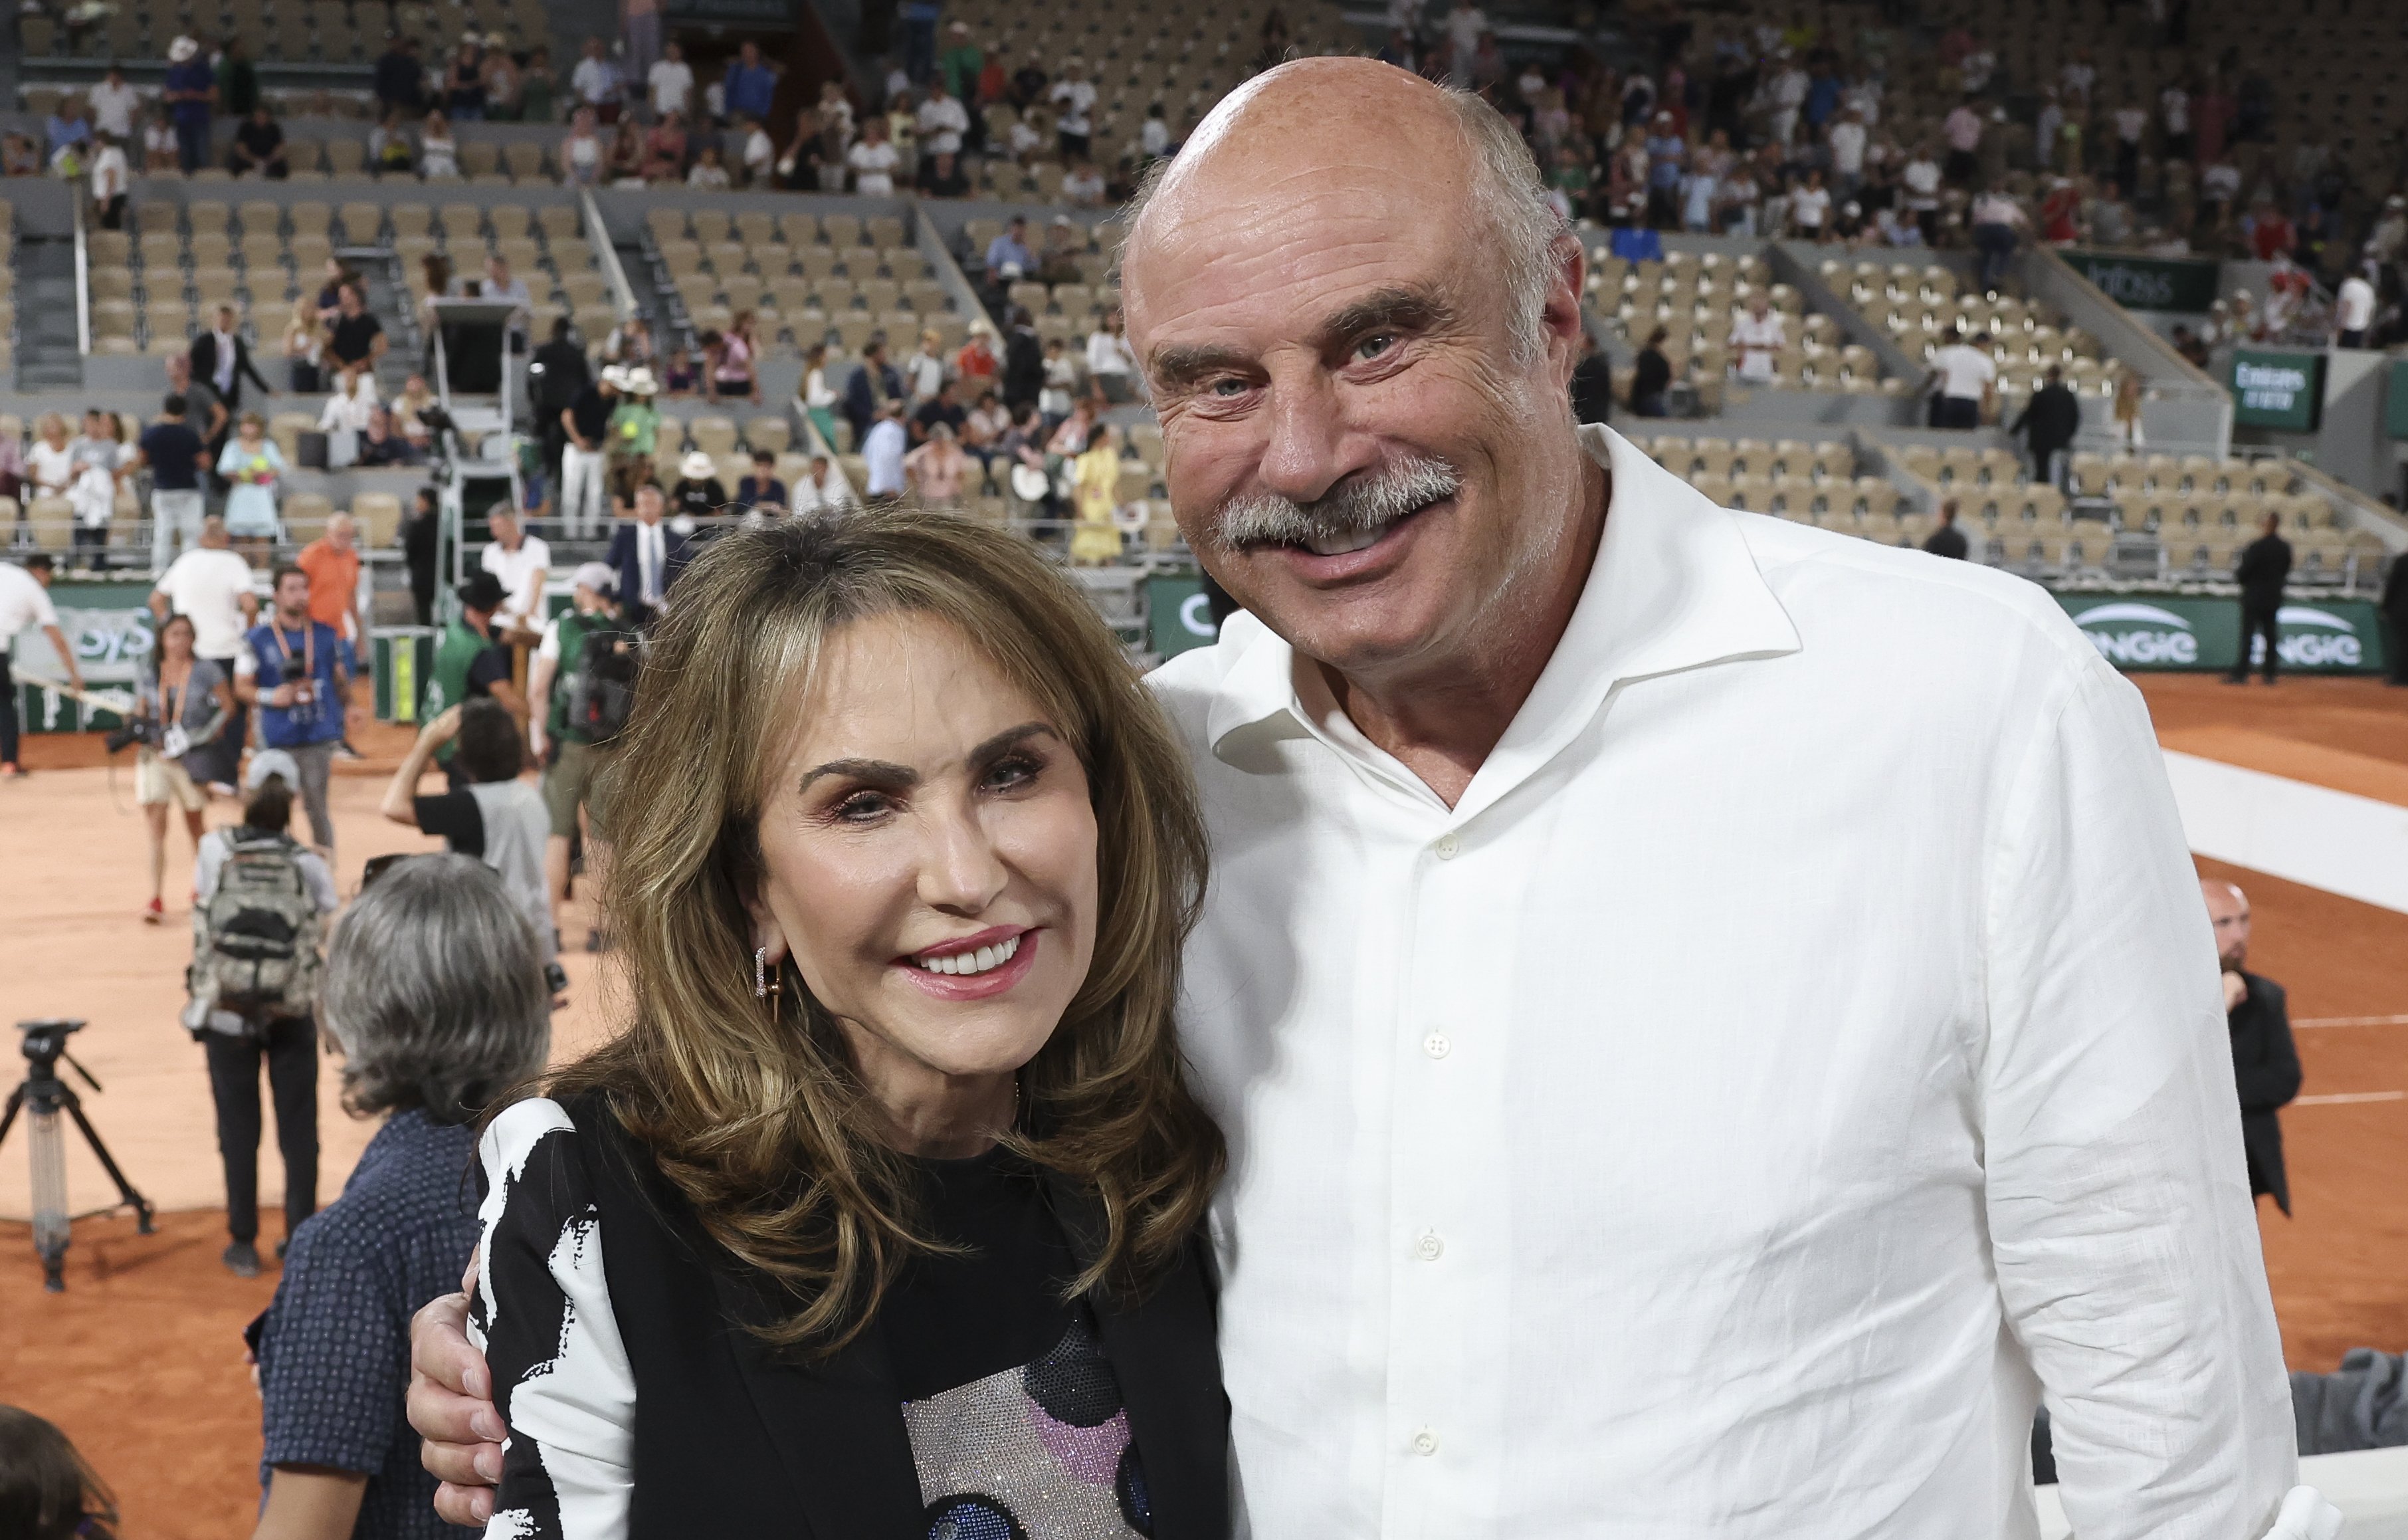 Dr. Phil aka Phil McGraw and his wife Robin McGraw attends the women's final on day 14 of the French Open 2022 held at Stade Roland Garros on June 4, 2022 in Paris, France. | Source: Getty Images